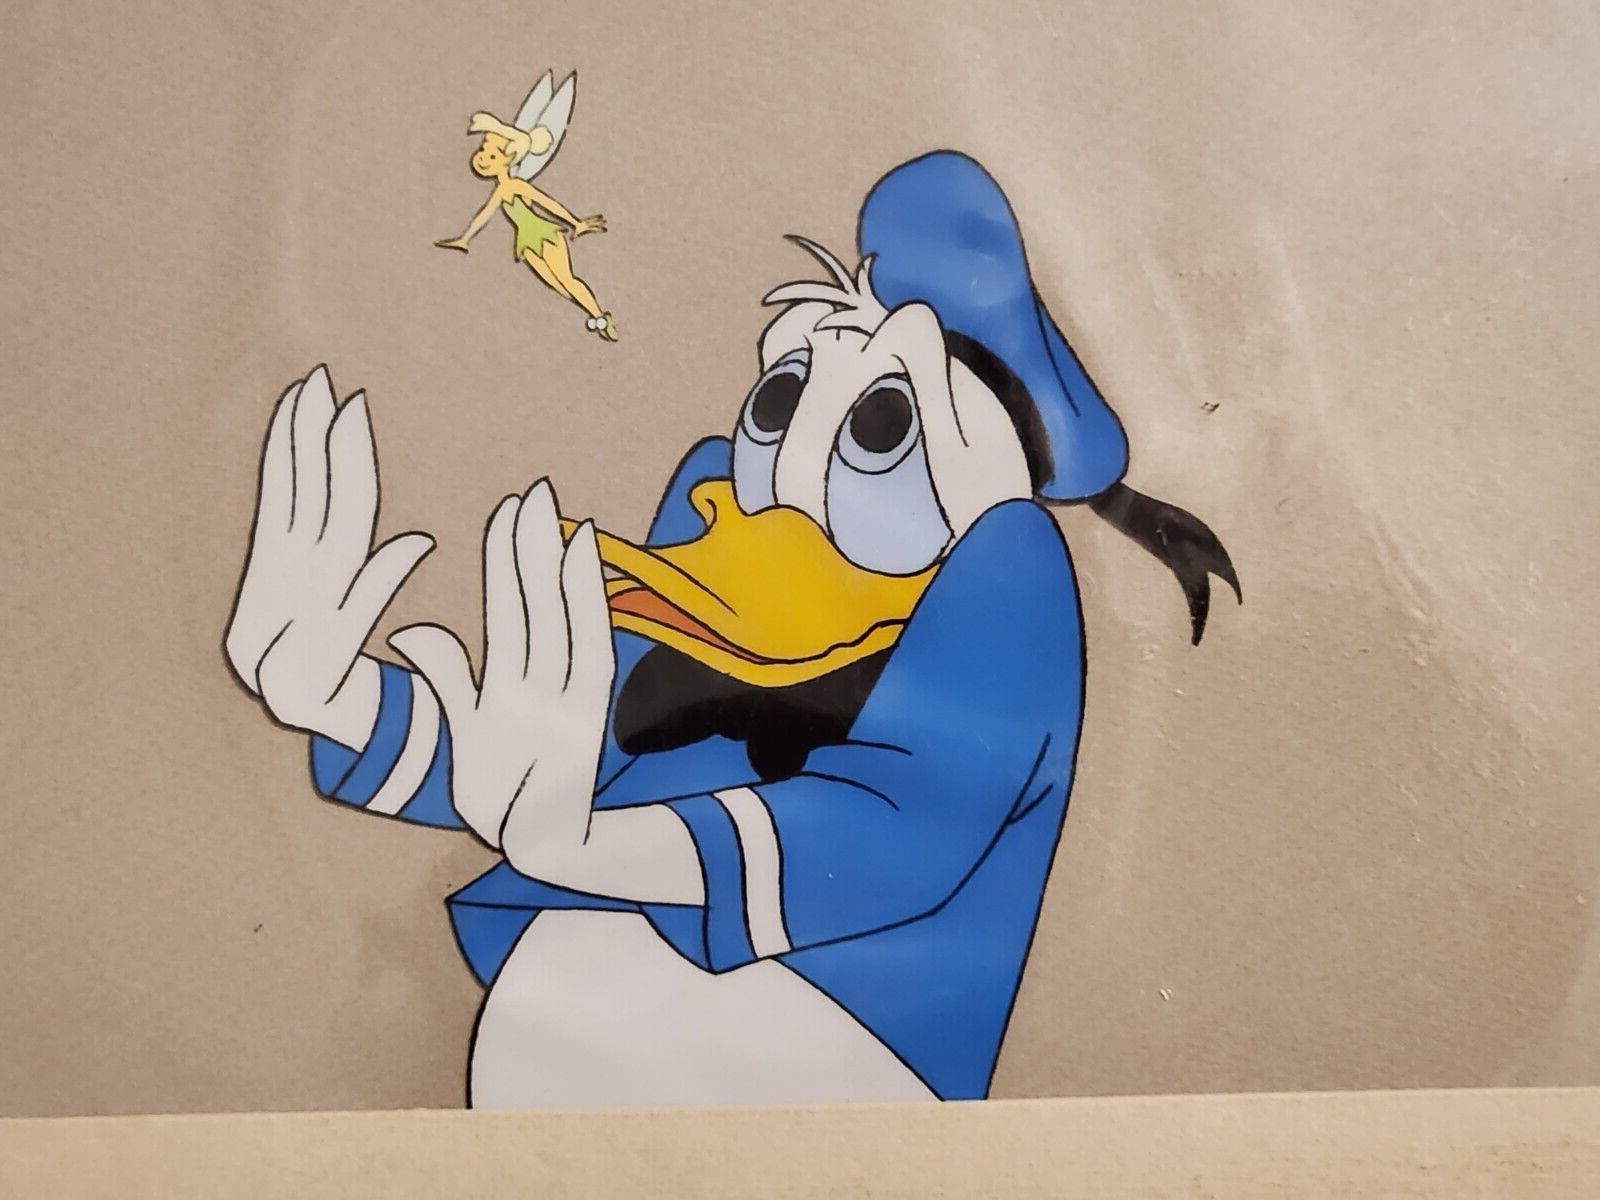 1950s DONALD DUCK TINKER BELL ORIGINAL HAND PAINTED PRODUCTION CELLULOID DRAWING